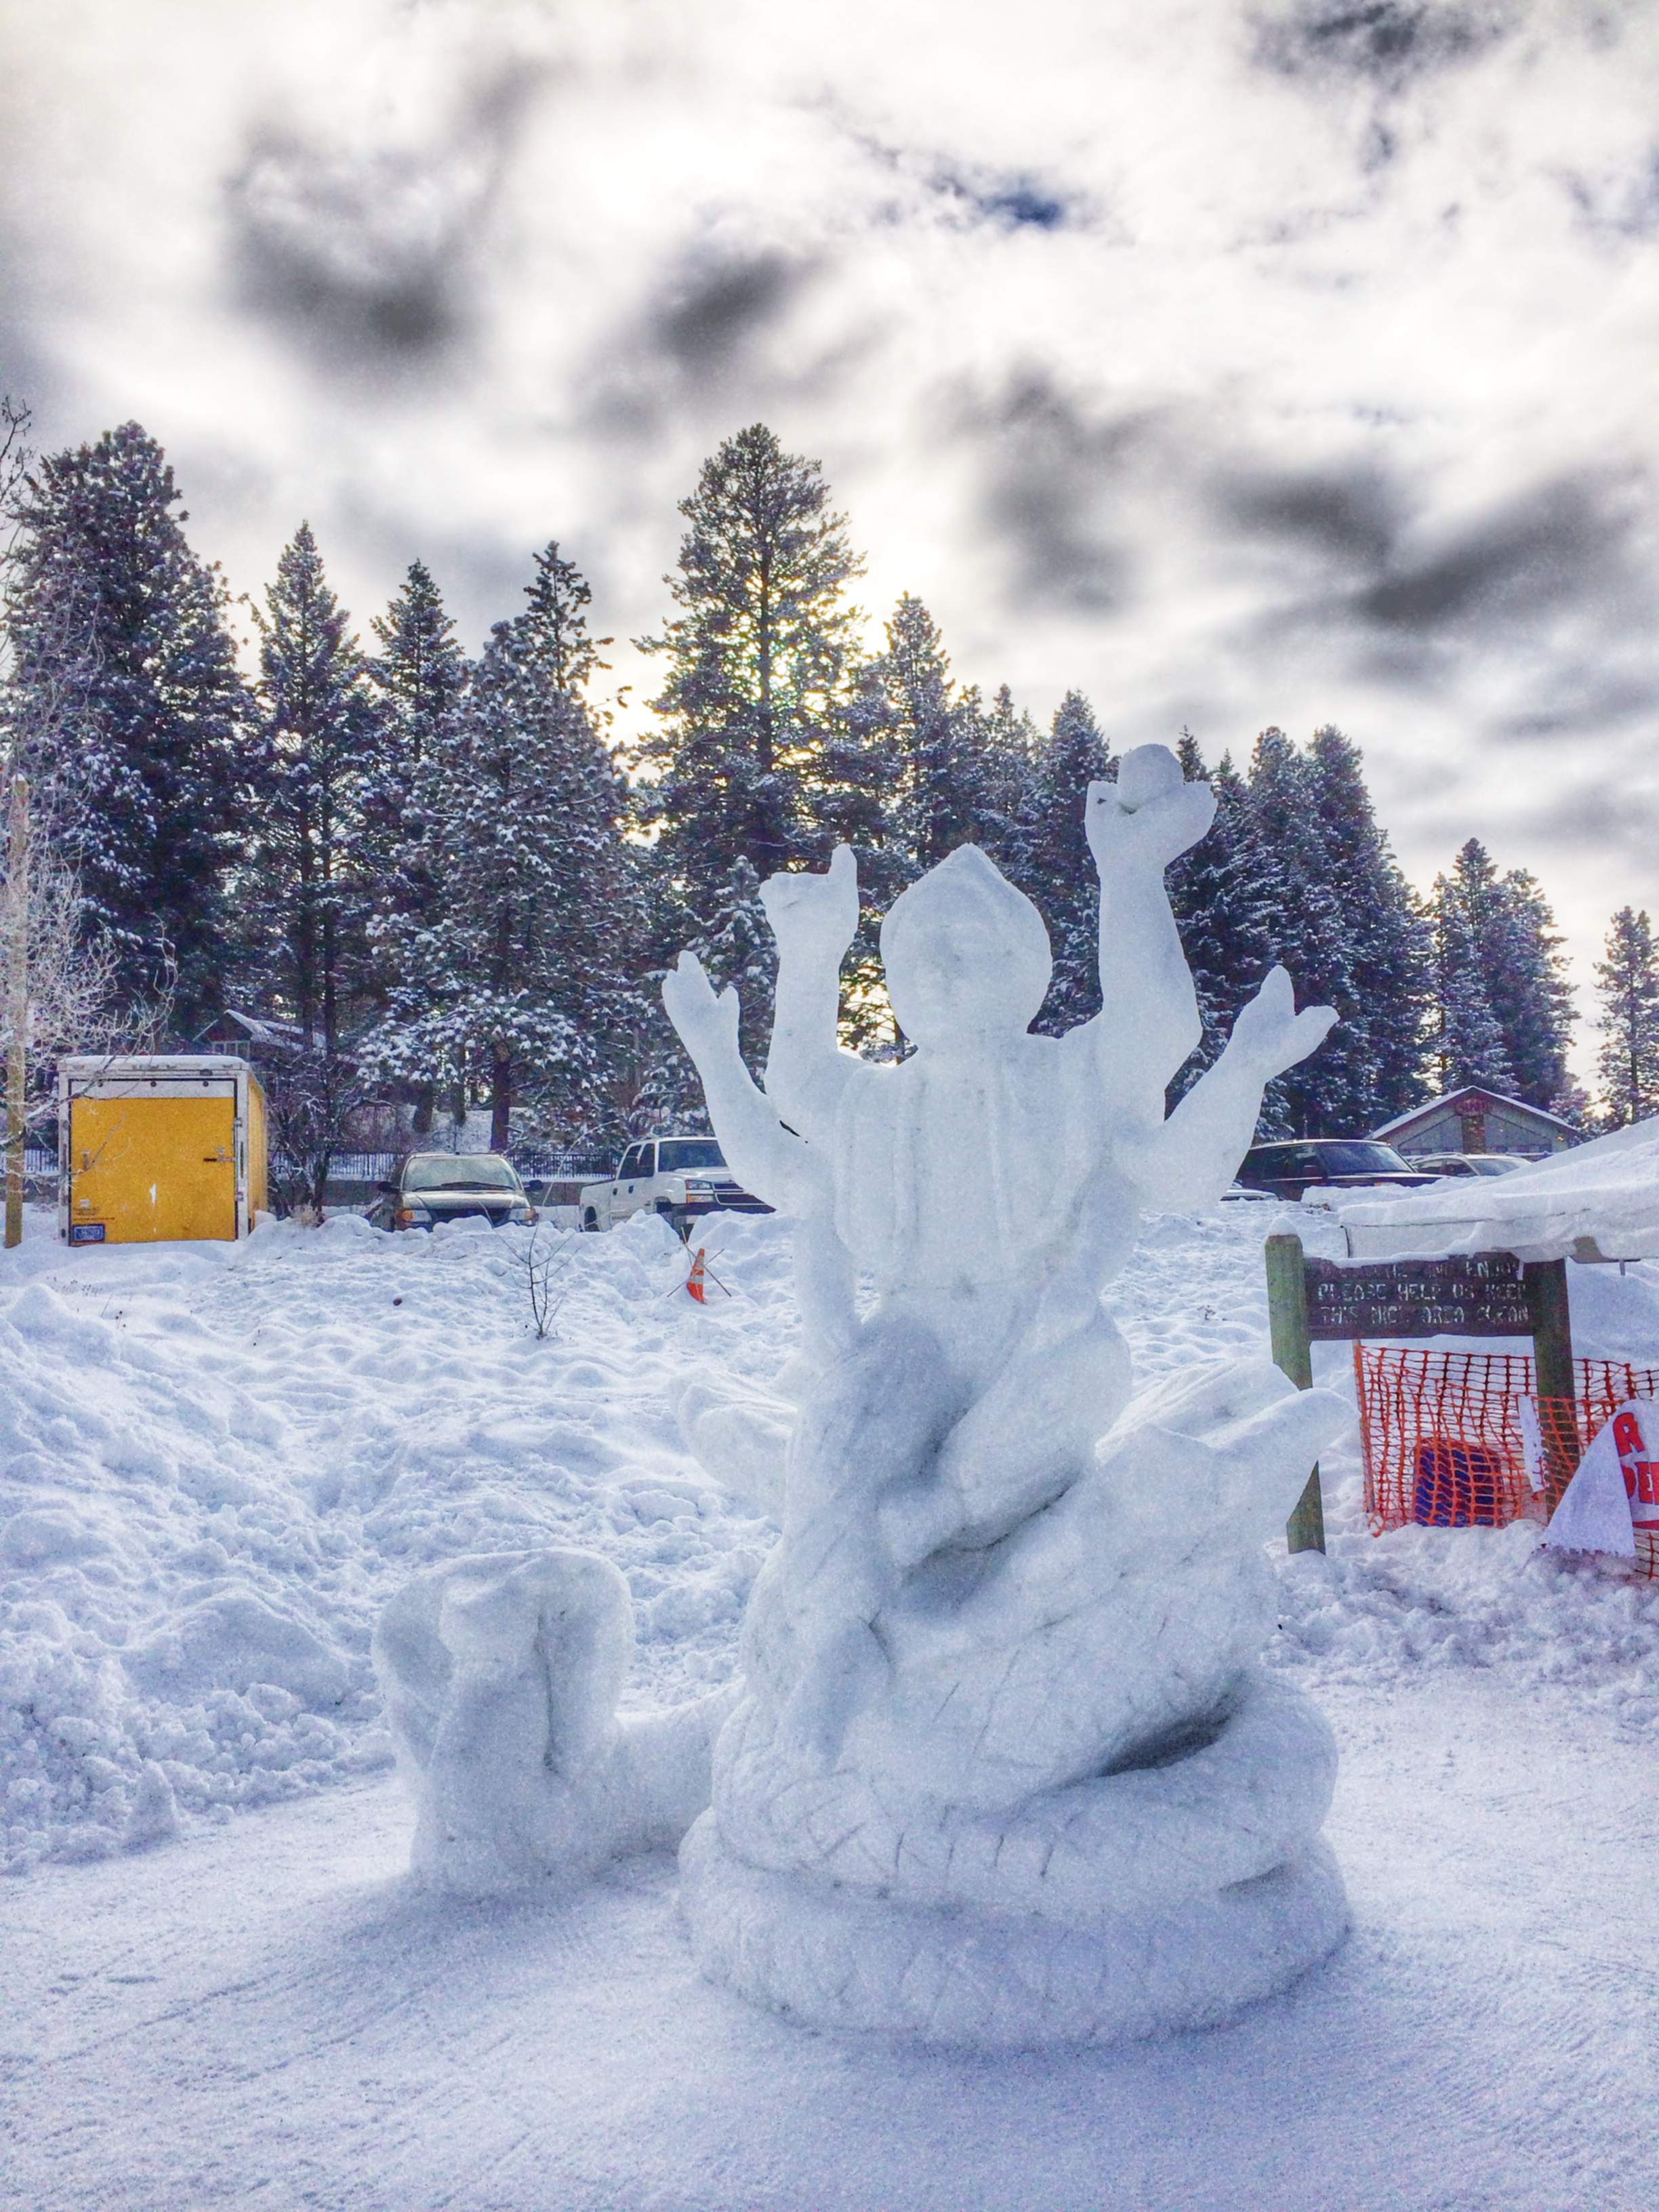 Idaho Snow Sculpting Competition Sculpture Judging - McCall Idaho, Let's Go!